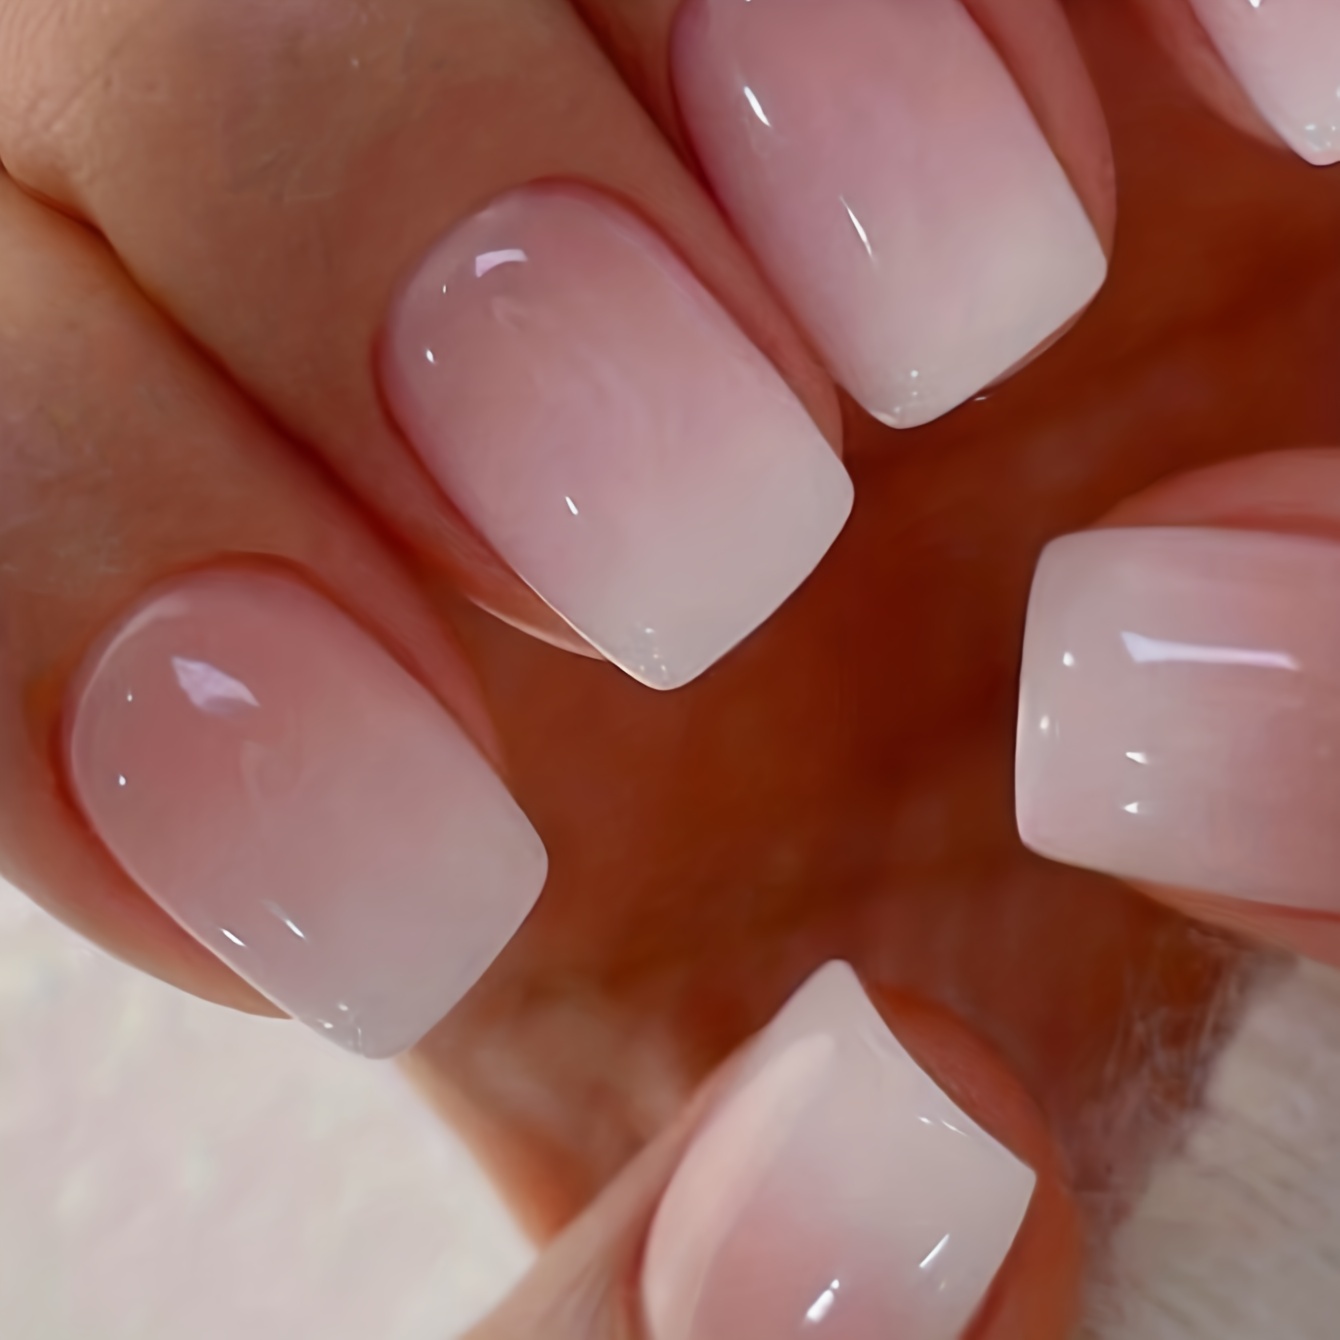  Pink Ombre Nails Press on Nails, Instant Luxury Square